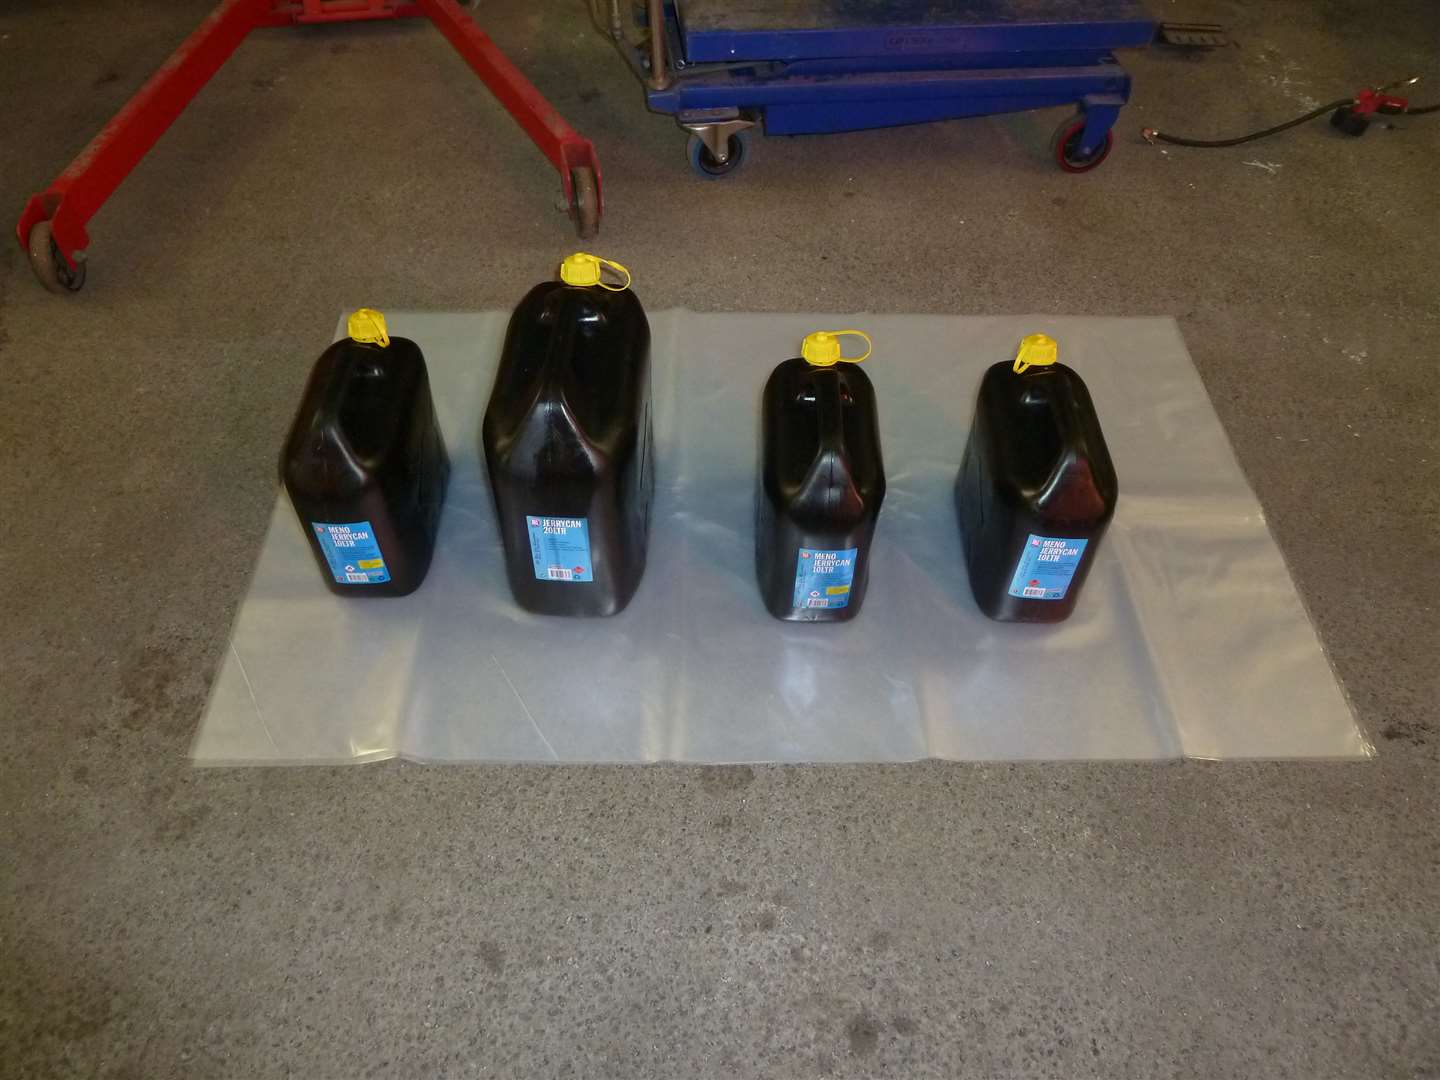 50 litres of liquid cocaine found in jerry cans